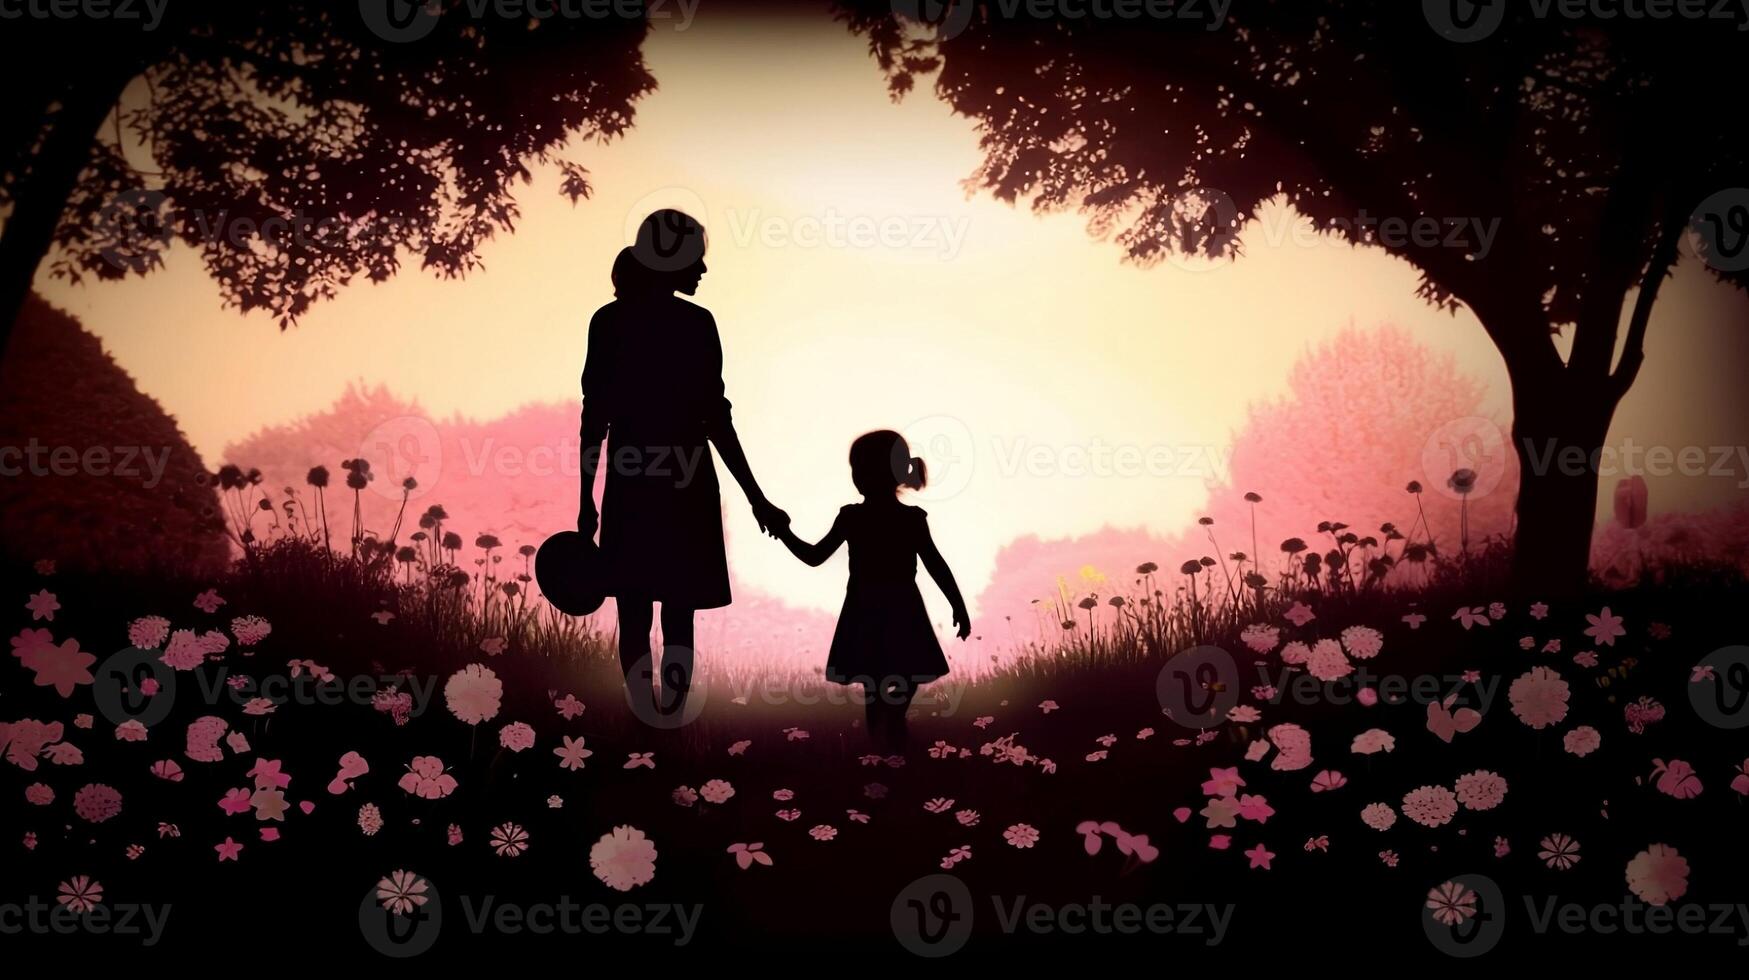 A Silhouette of a Mother and Child Holding Hands and Walking in a Park Surrounded by Blooming Flowers - photo